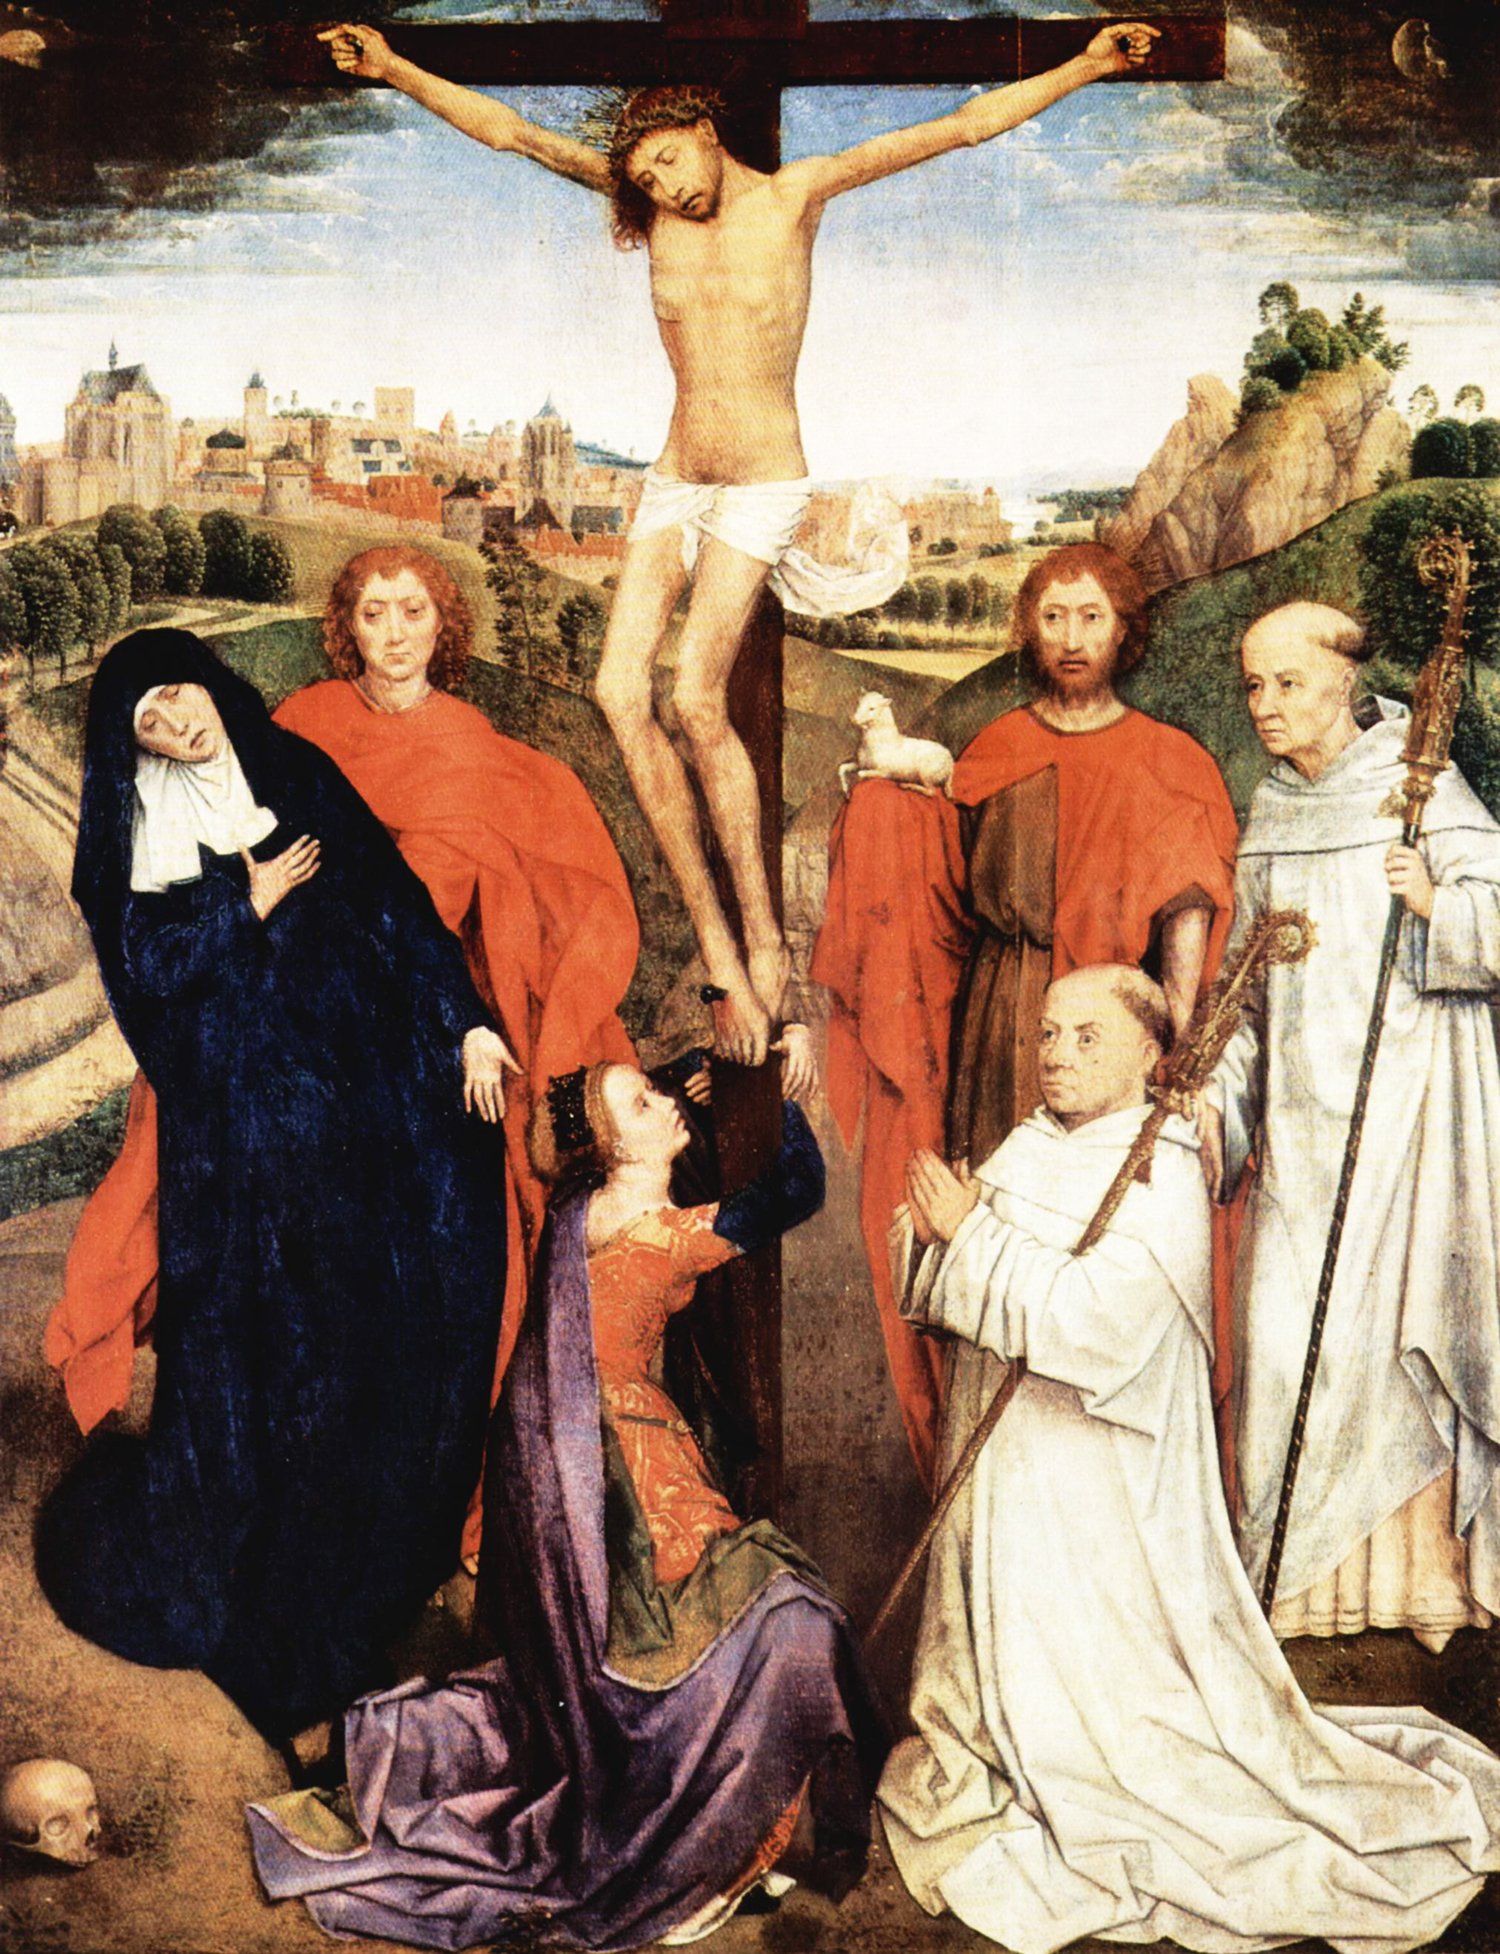 A painting titled "Crucifixion" by Hans Memling. The image depicts the biblical scene of Jesus Christ's crucifixion. Christ is centered on the cross, with a sorrowful expression, against a backdrop of a serene, detailed landscape featuring a city and hills under a partly cloudy sky. At the foot of the cross, to the left, the Virgin Mary is depicted in a fainting pose, supported by John the Evangelist in a red cloak. On the right, Saint John the Baptist, identifiable by his camel-skin garment and the lamb symbol, stands with a bishop, possibly representing Saint Jerome, who is holding a crucifix staff. In the foreground, Mary Magdalene is shown kneeling and looking up at Jesus, her hands clasped in prayer and devotion. The painting is rich in religious symbolism and evokes a deep sense of piety and reflection.